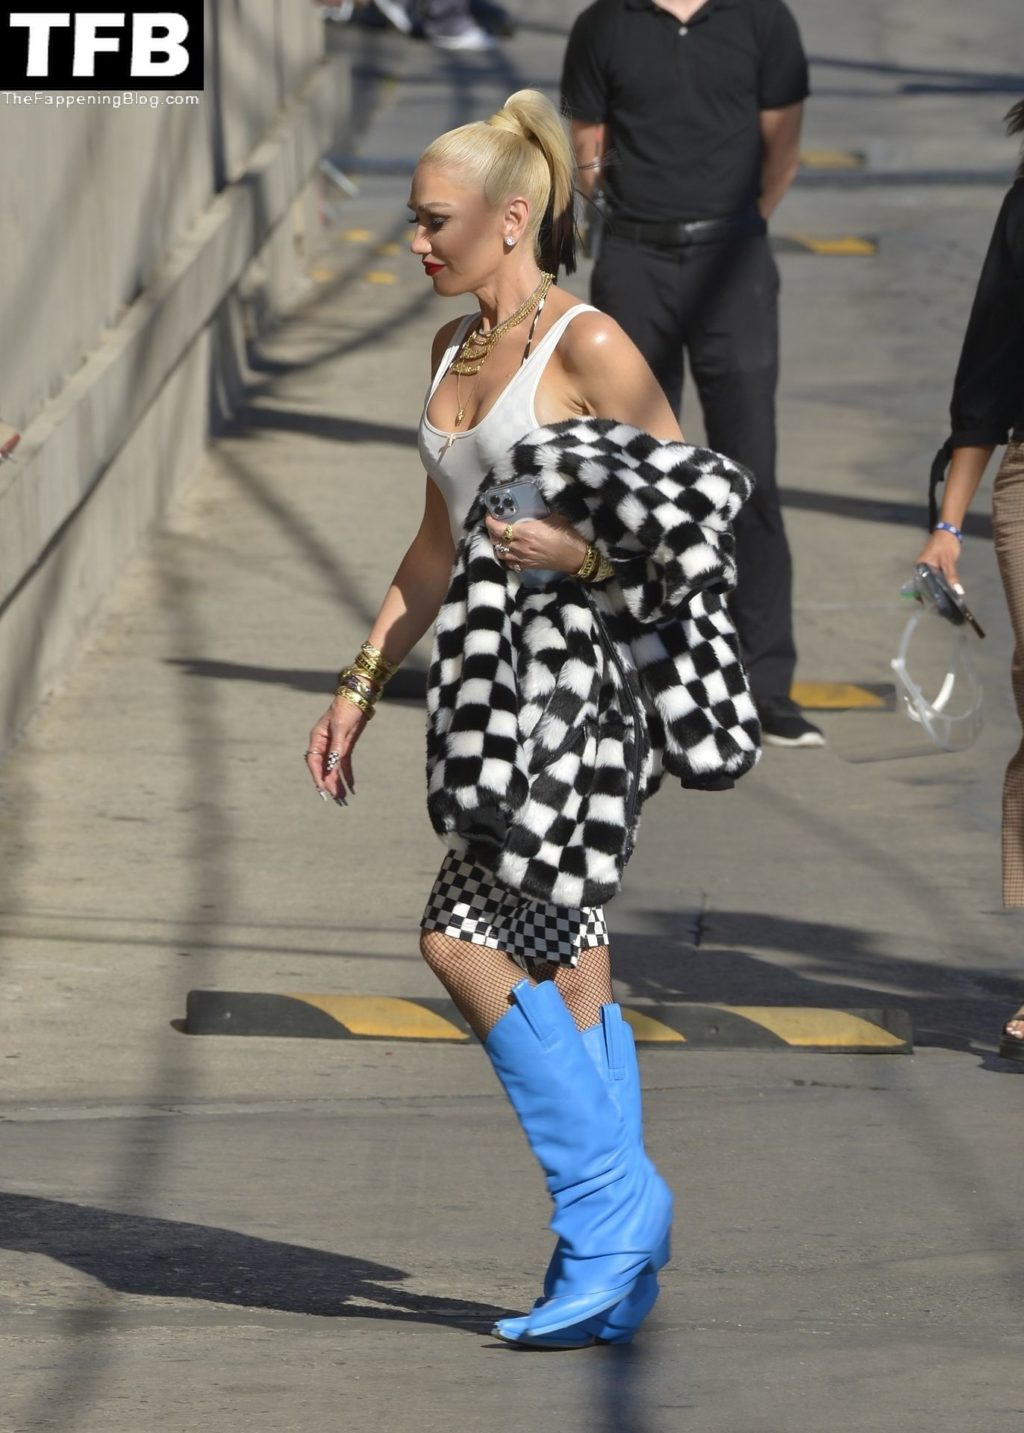 Gwen Stefani Sexy The Fappening Blog 34 1024x1433 - Gwen Stefani Arrives For an Appearance on Jimmy Kimmel Live! (87 Photos)